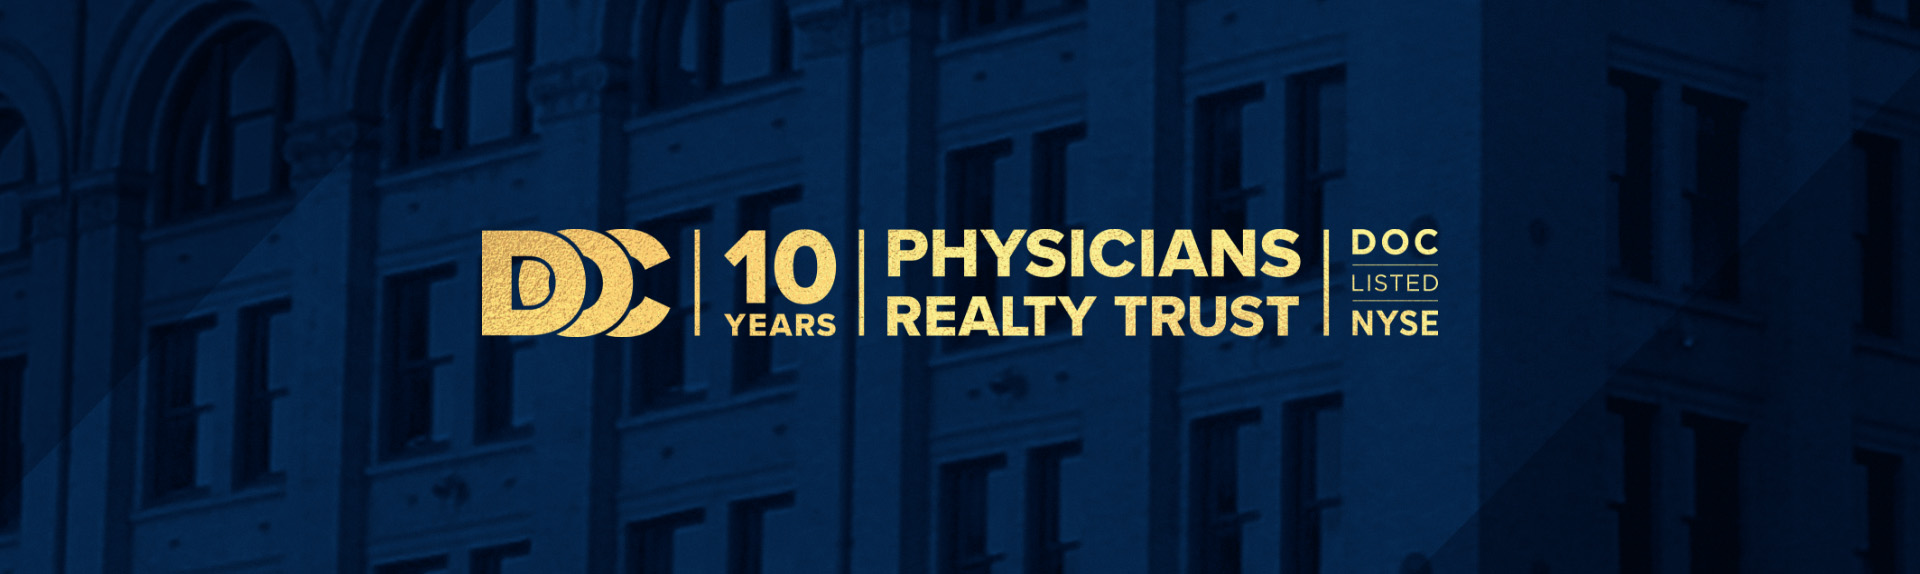 DOC 10 Years Physicians Realty Trust DOC Listed NYSE